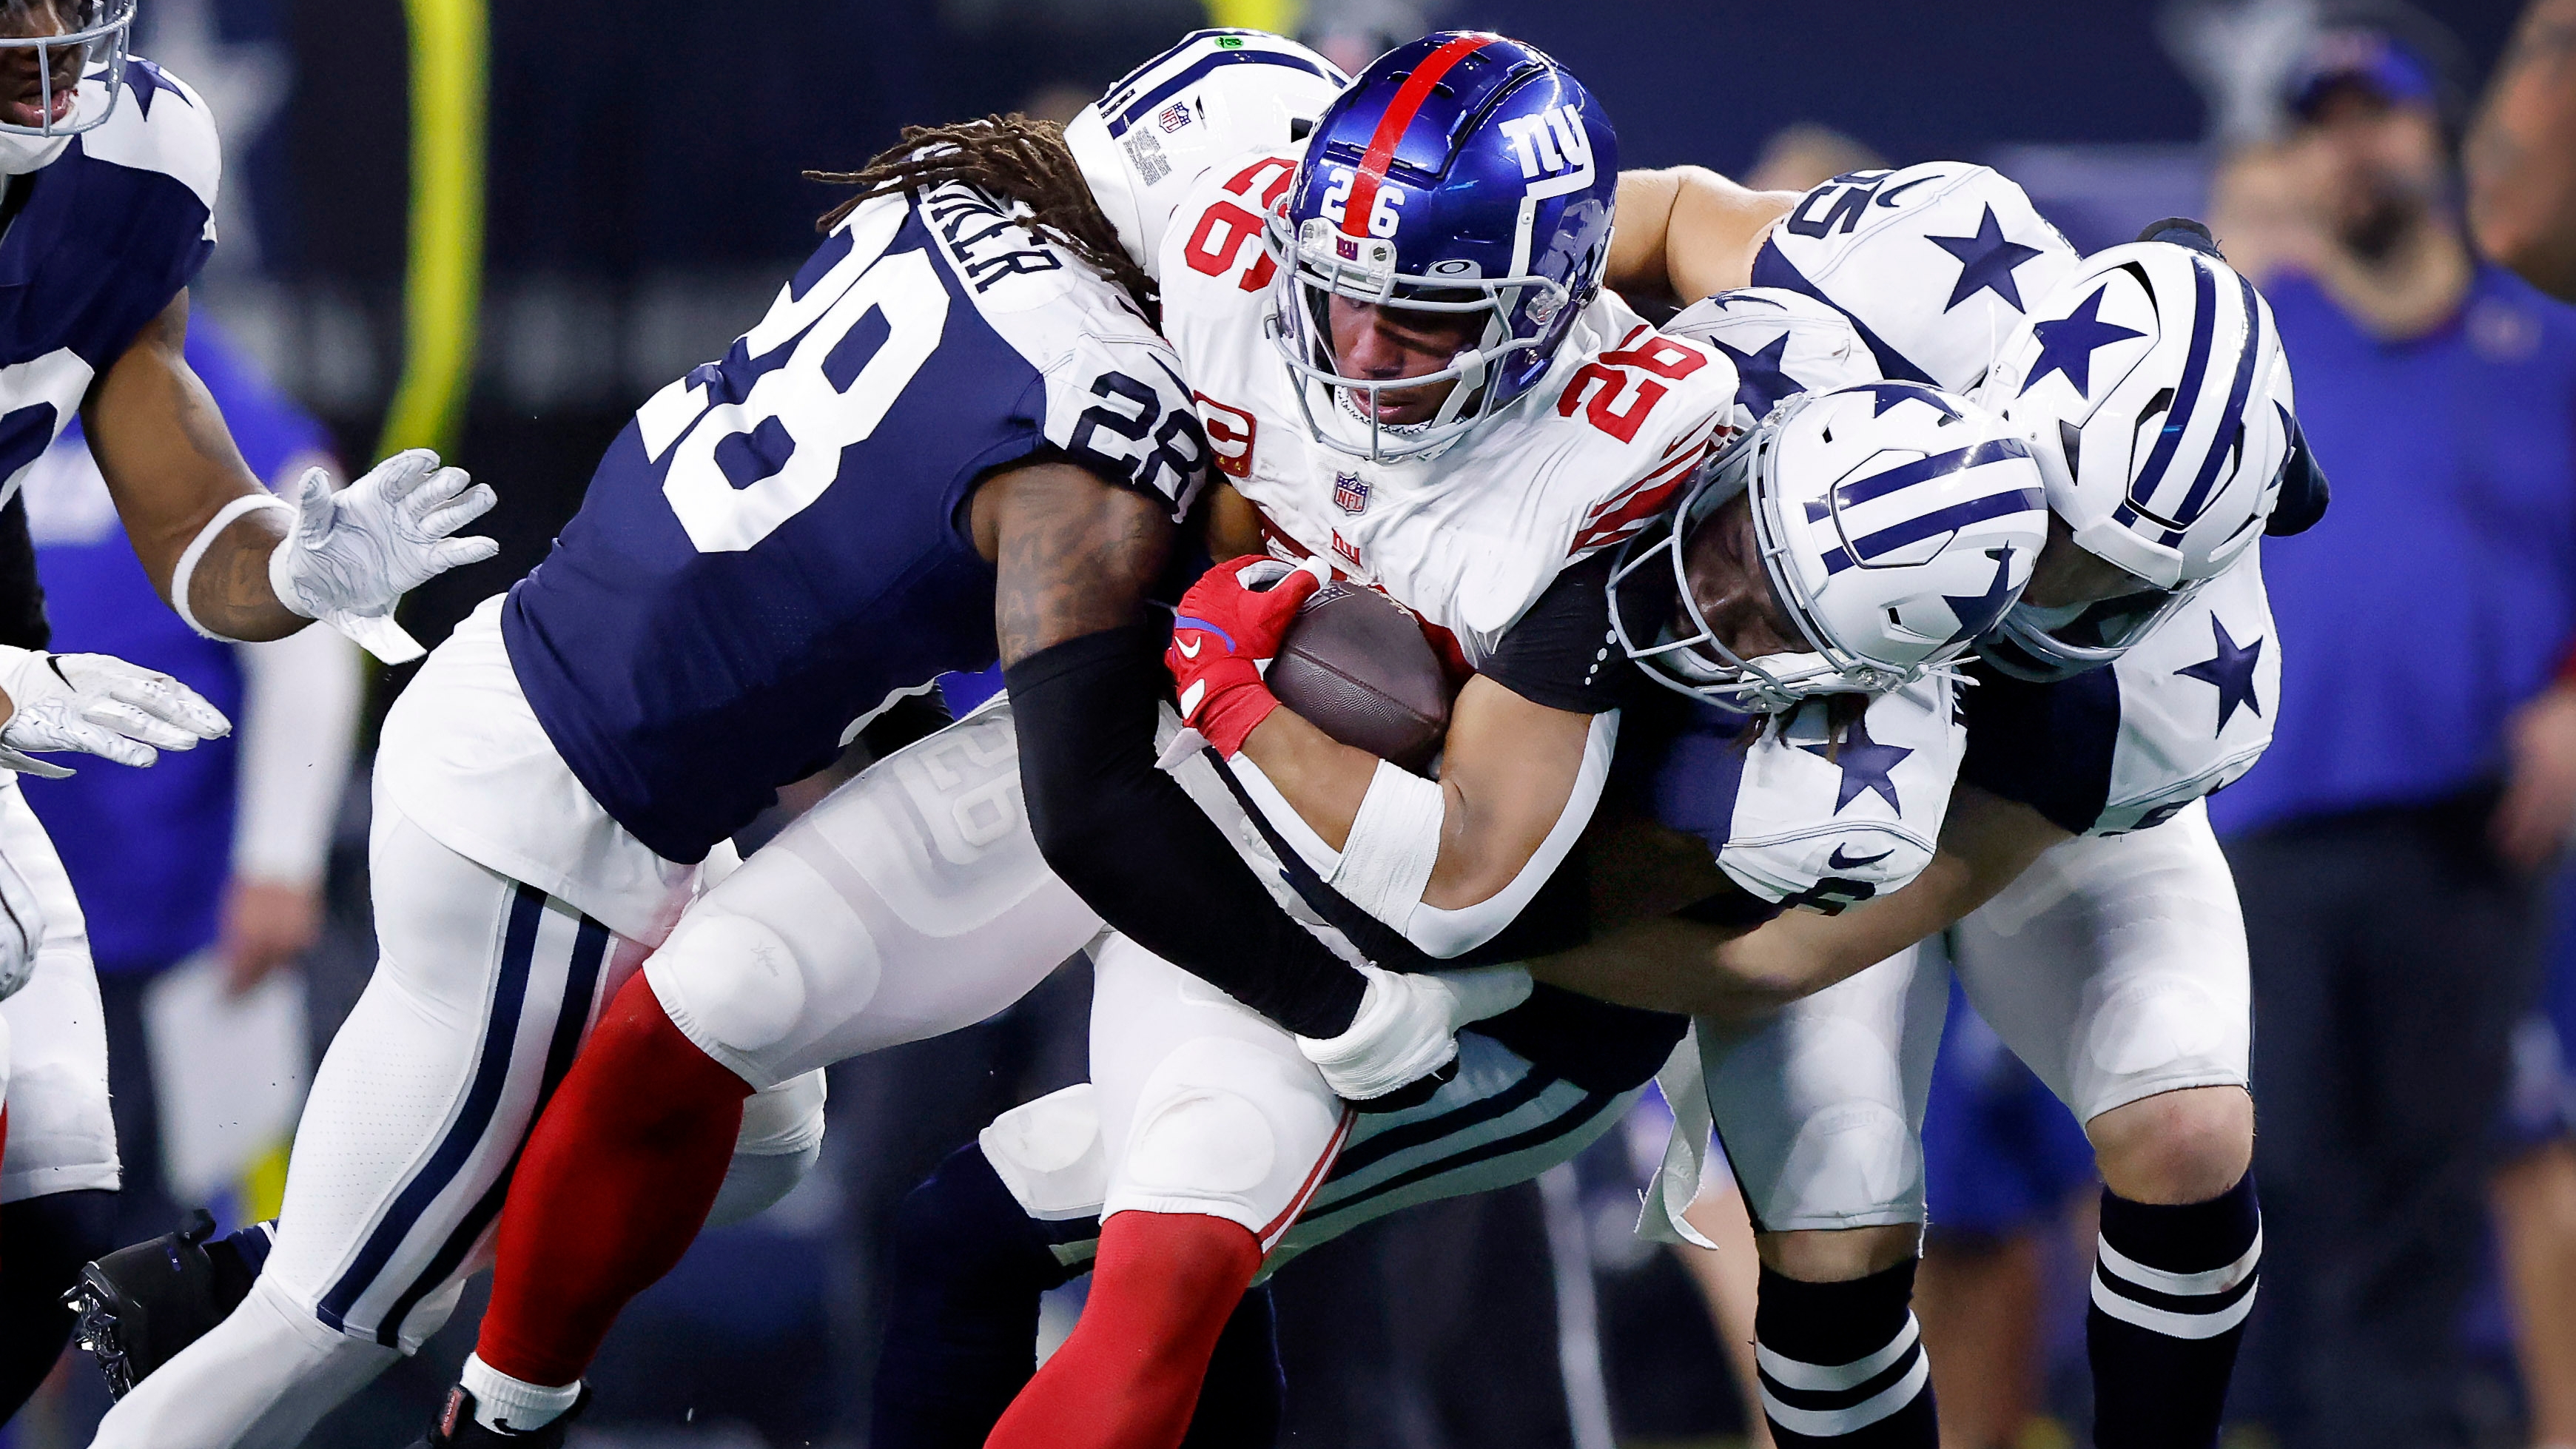 Cowboys beat Giants 28-20 in Thanksgiving game